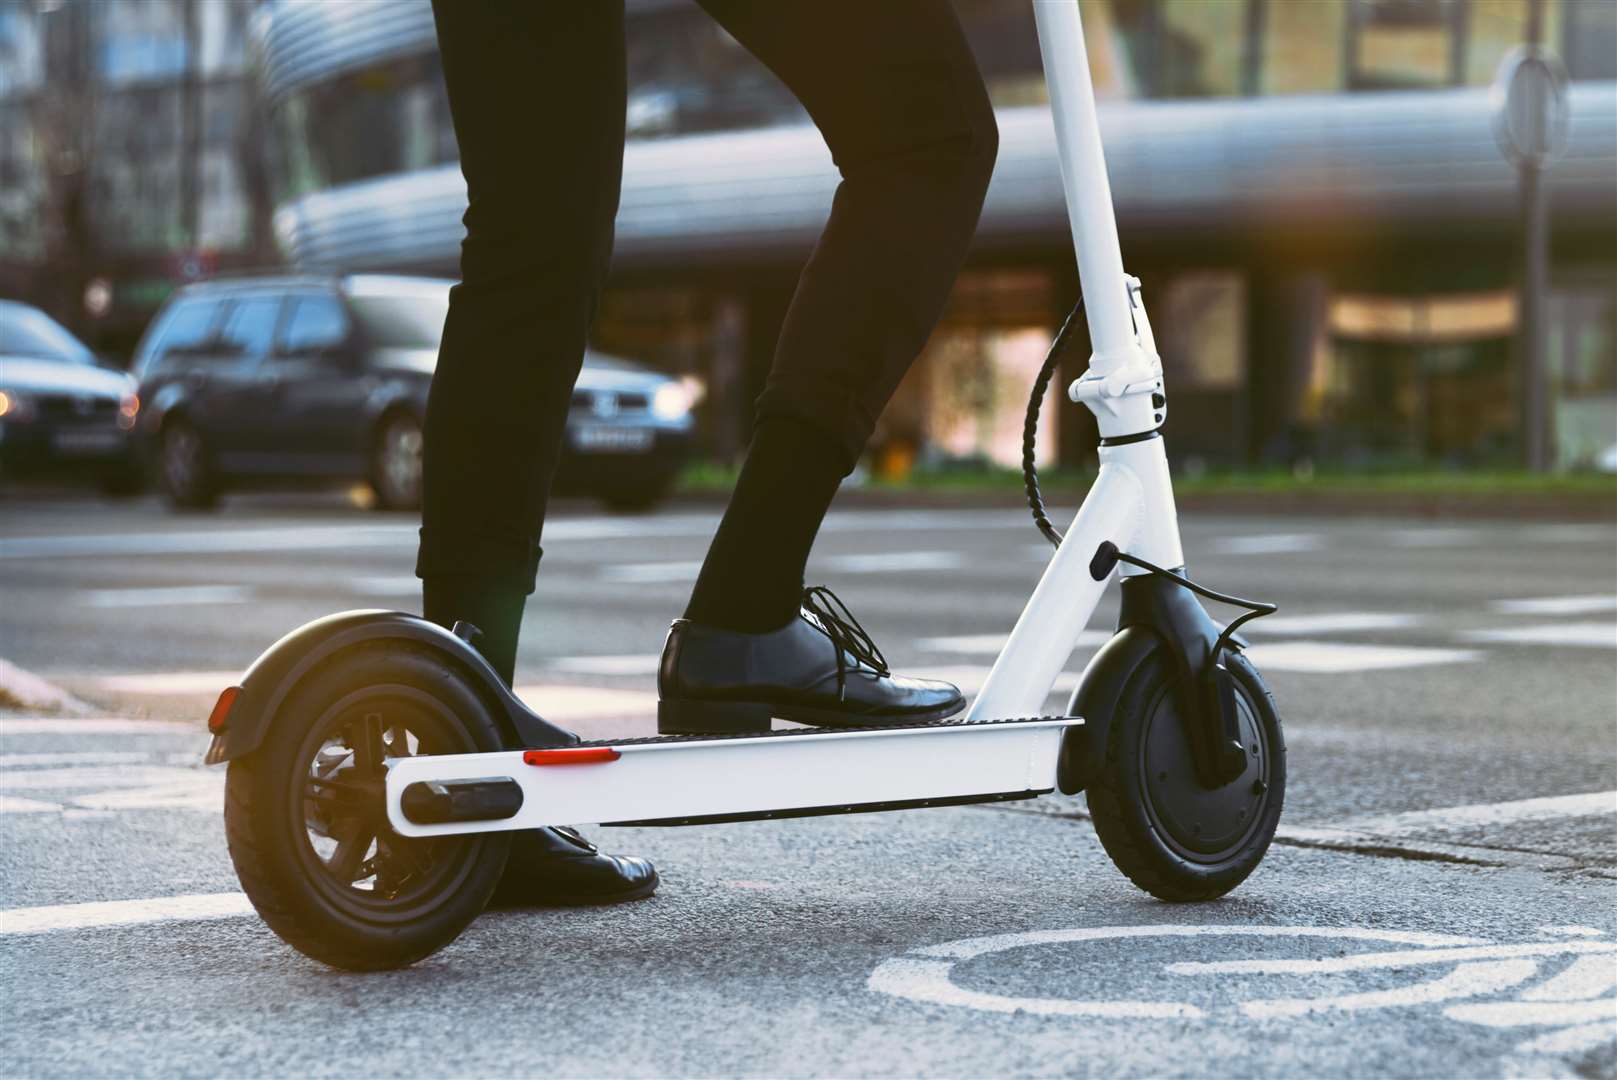 In Spain, e-scooters in many areas are subject to tighter regulation. Image: Stock photo.